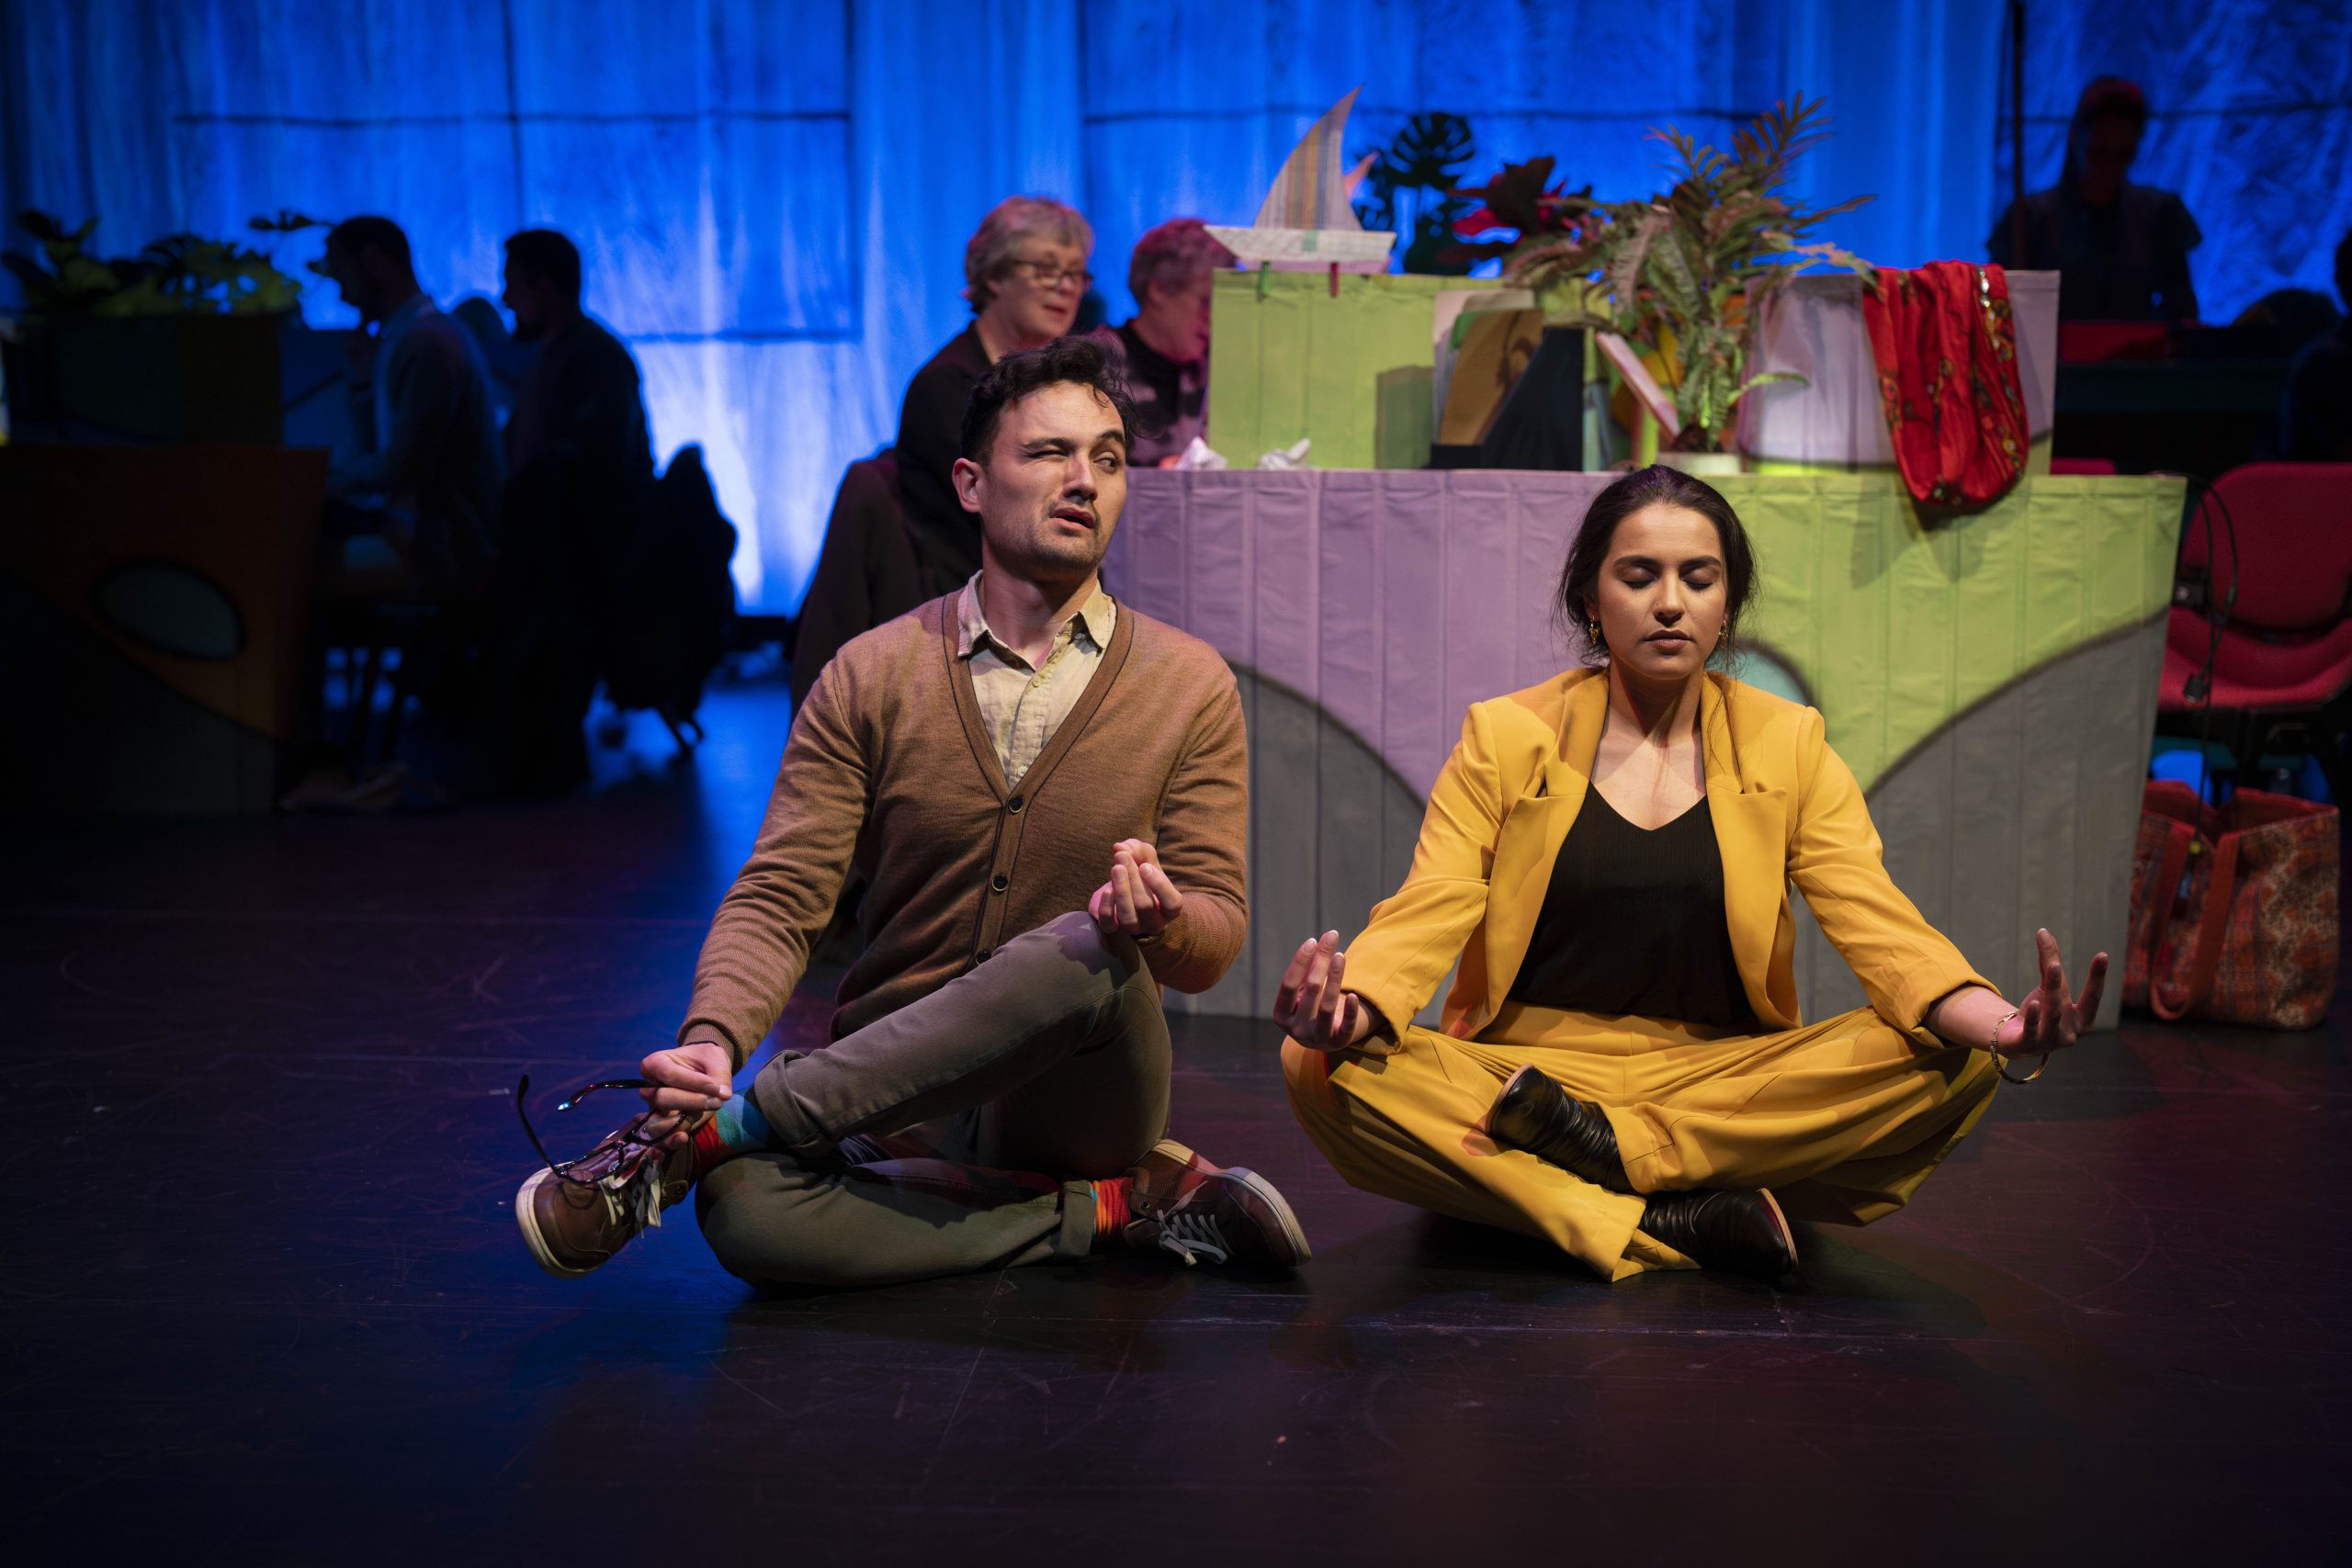 Actor Tessa Rao sits in a yellow pant suit in a yogi pose on the ground. Justin Rogers sits in a brown jumper in an awkward yogi pose while staring at Tessa with one eye open and one closed. 